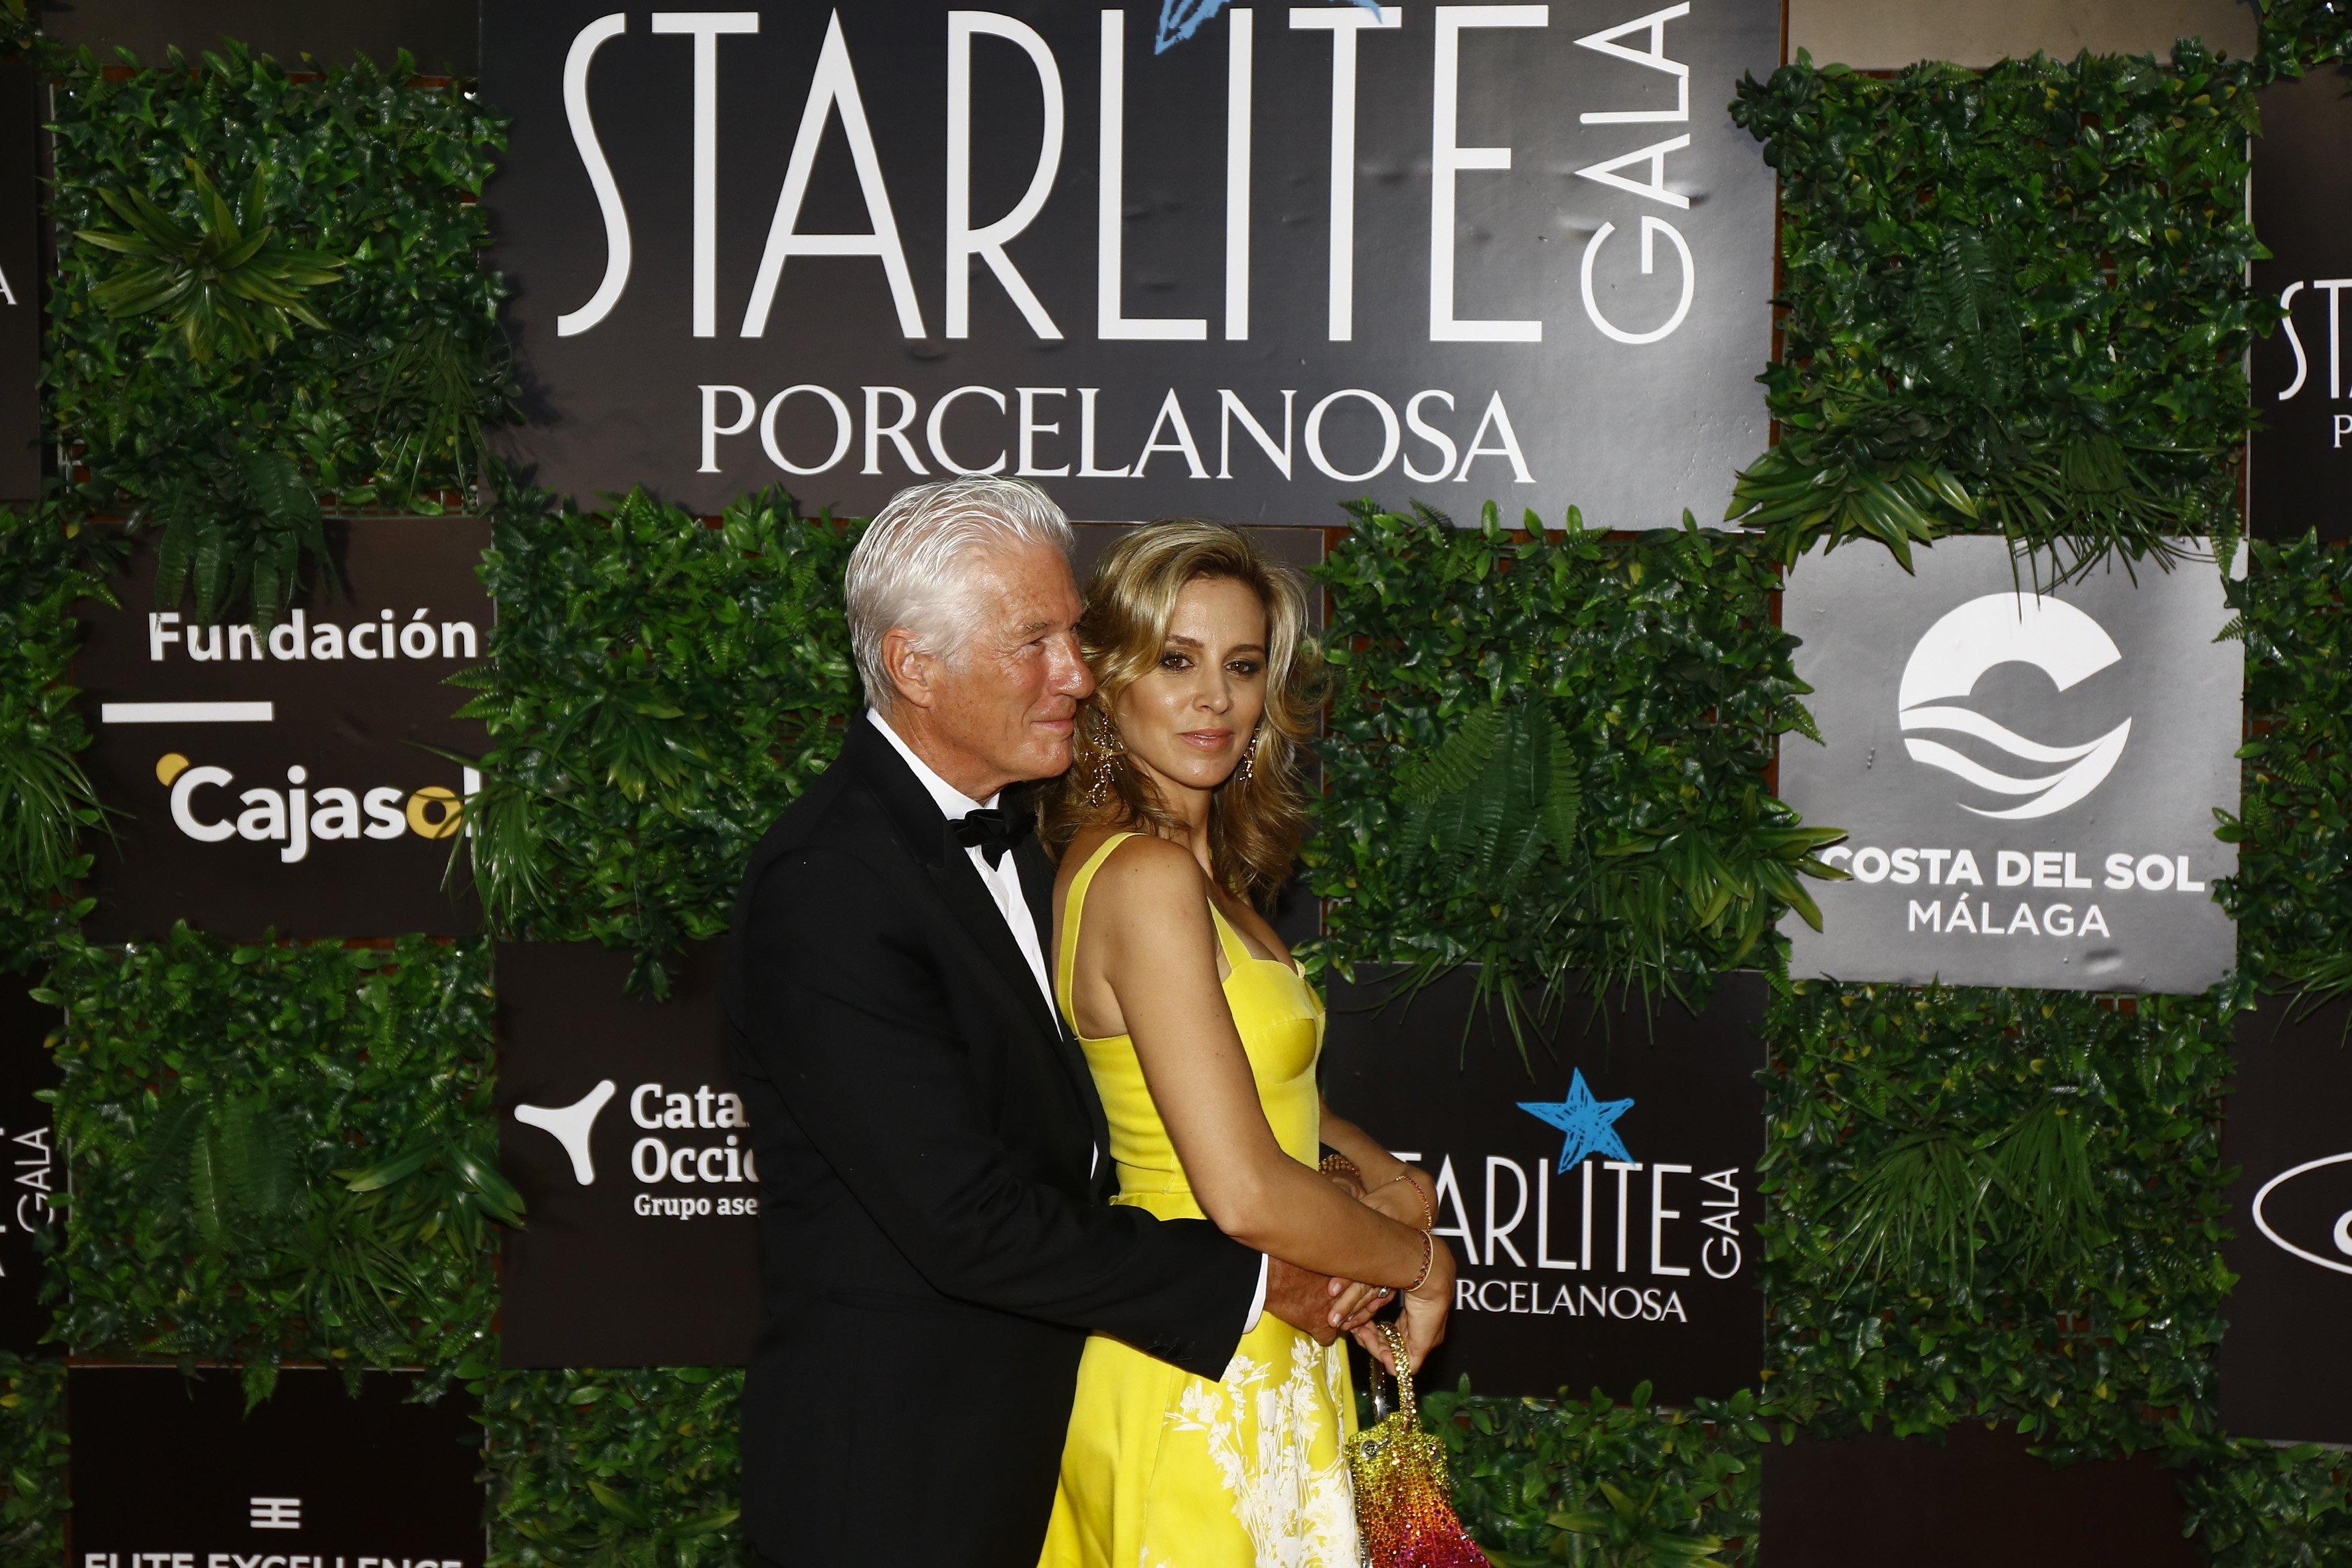 Richard Gere and Alejandra Silva attend the Starlite Porcelanosa Gala 2022 at La Cantera on August 14, 2022 in Marbella, Spain. | Source: Getty Images